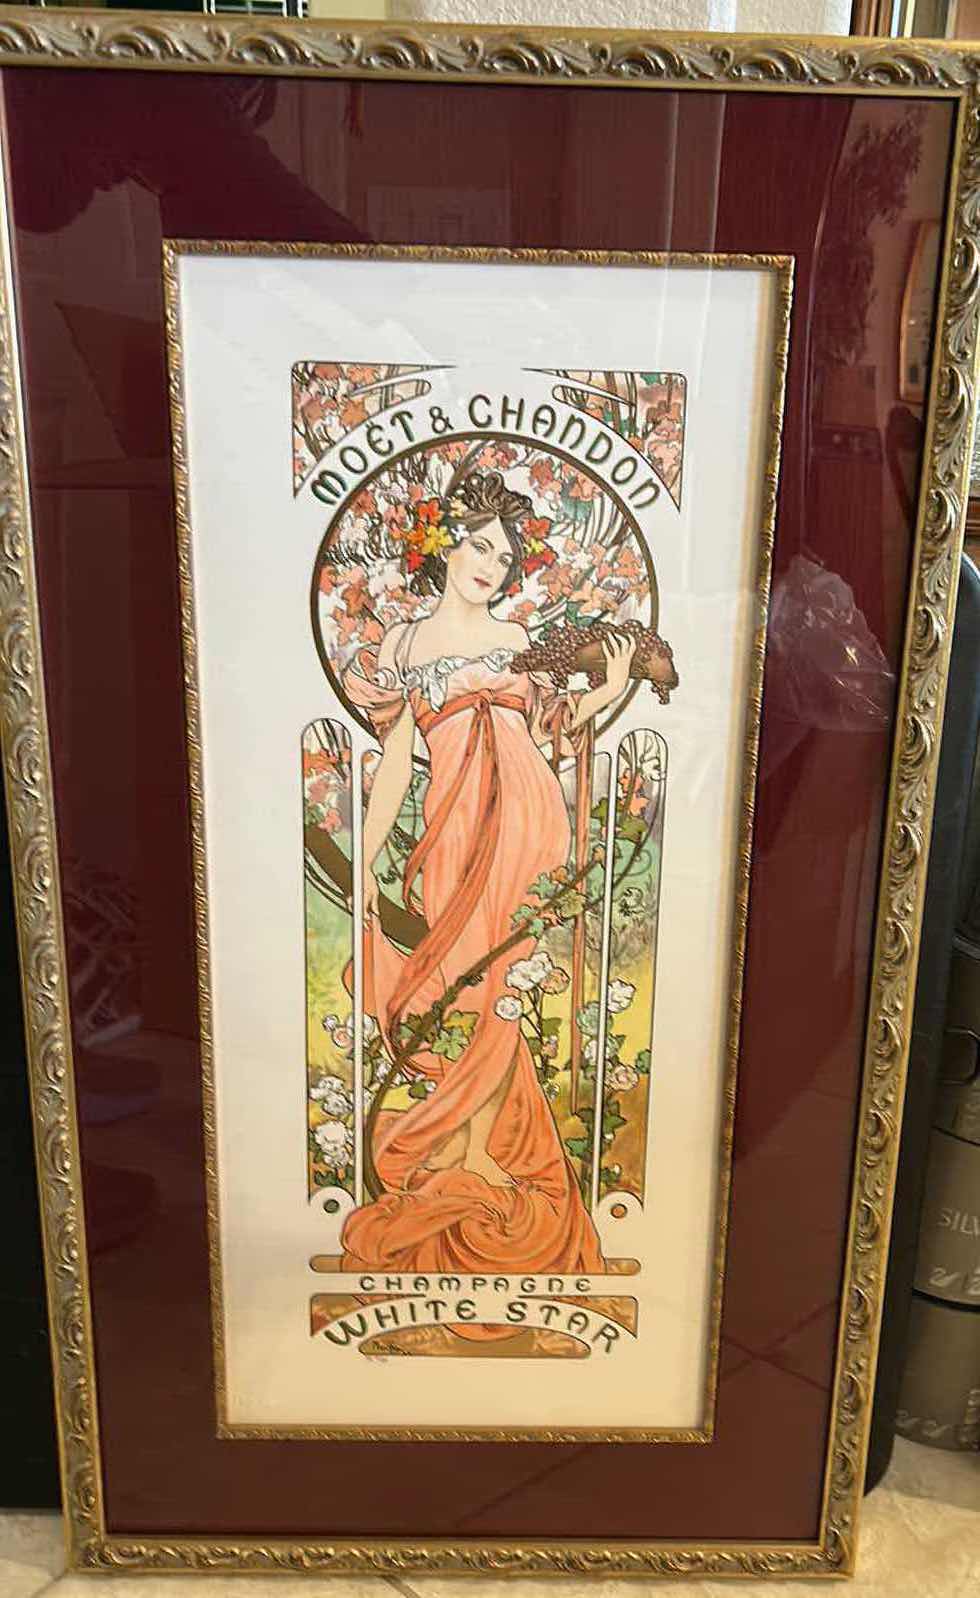 Photo 5 of NUMBERED AND SIGNED MUCHA “MOËT & CHANDON CHAMPAGNE WHITE STAR” ARTWORK GOLD FRAMED 18 1/4“ x 33“